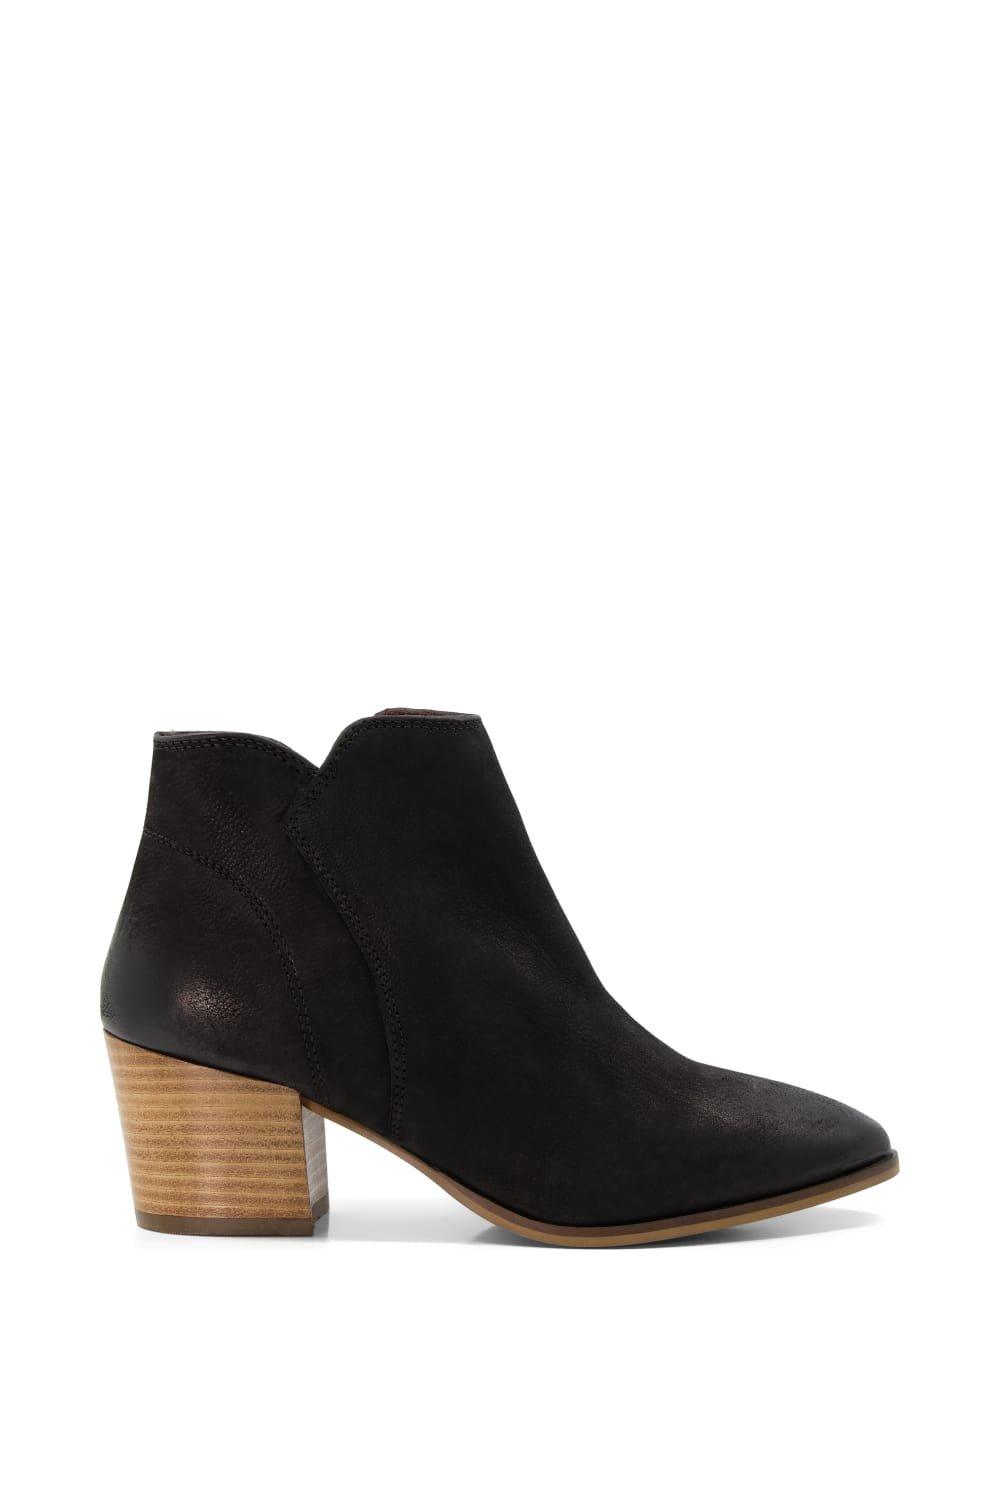 Boots | 'Parlor' Ankle Boots | Dune London